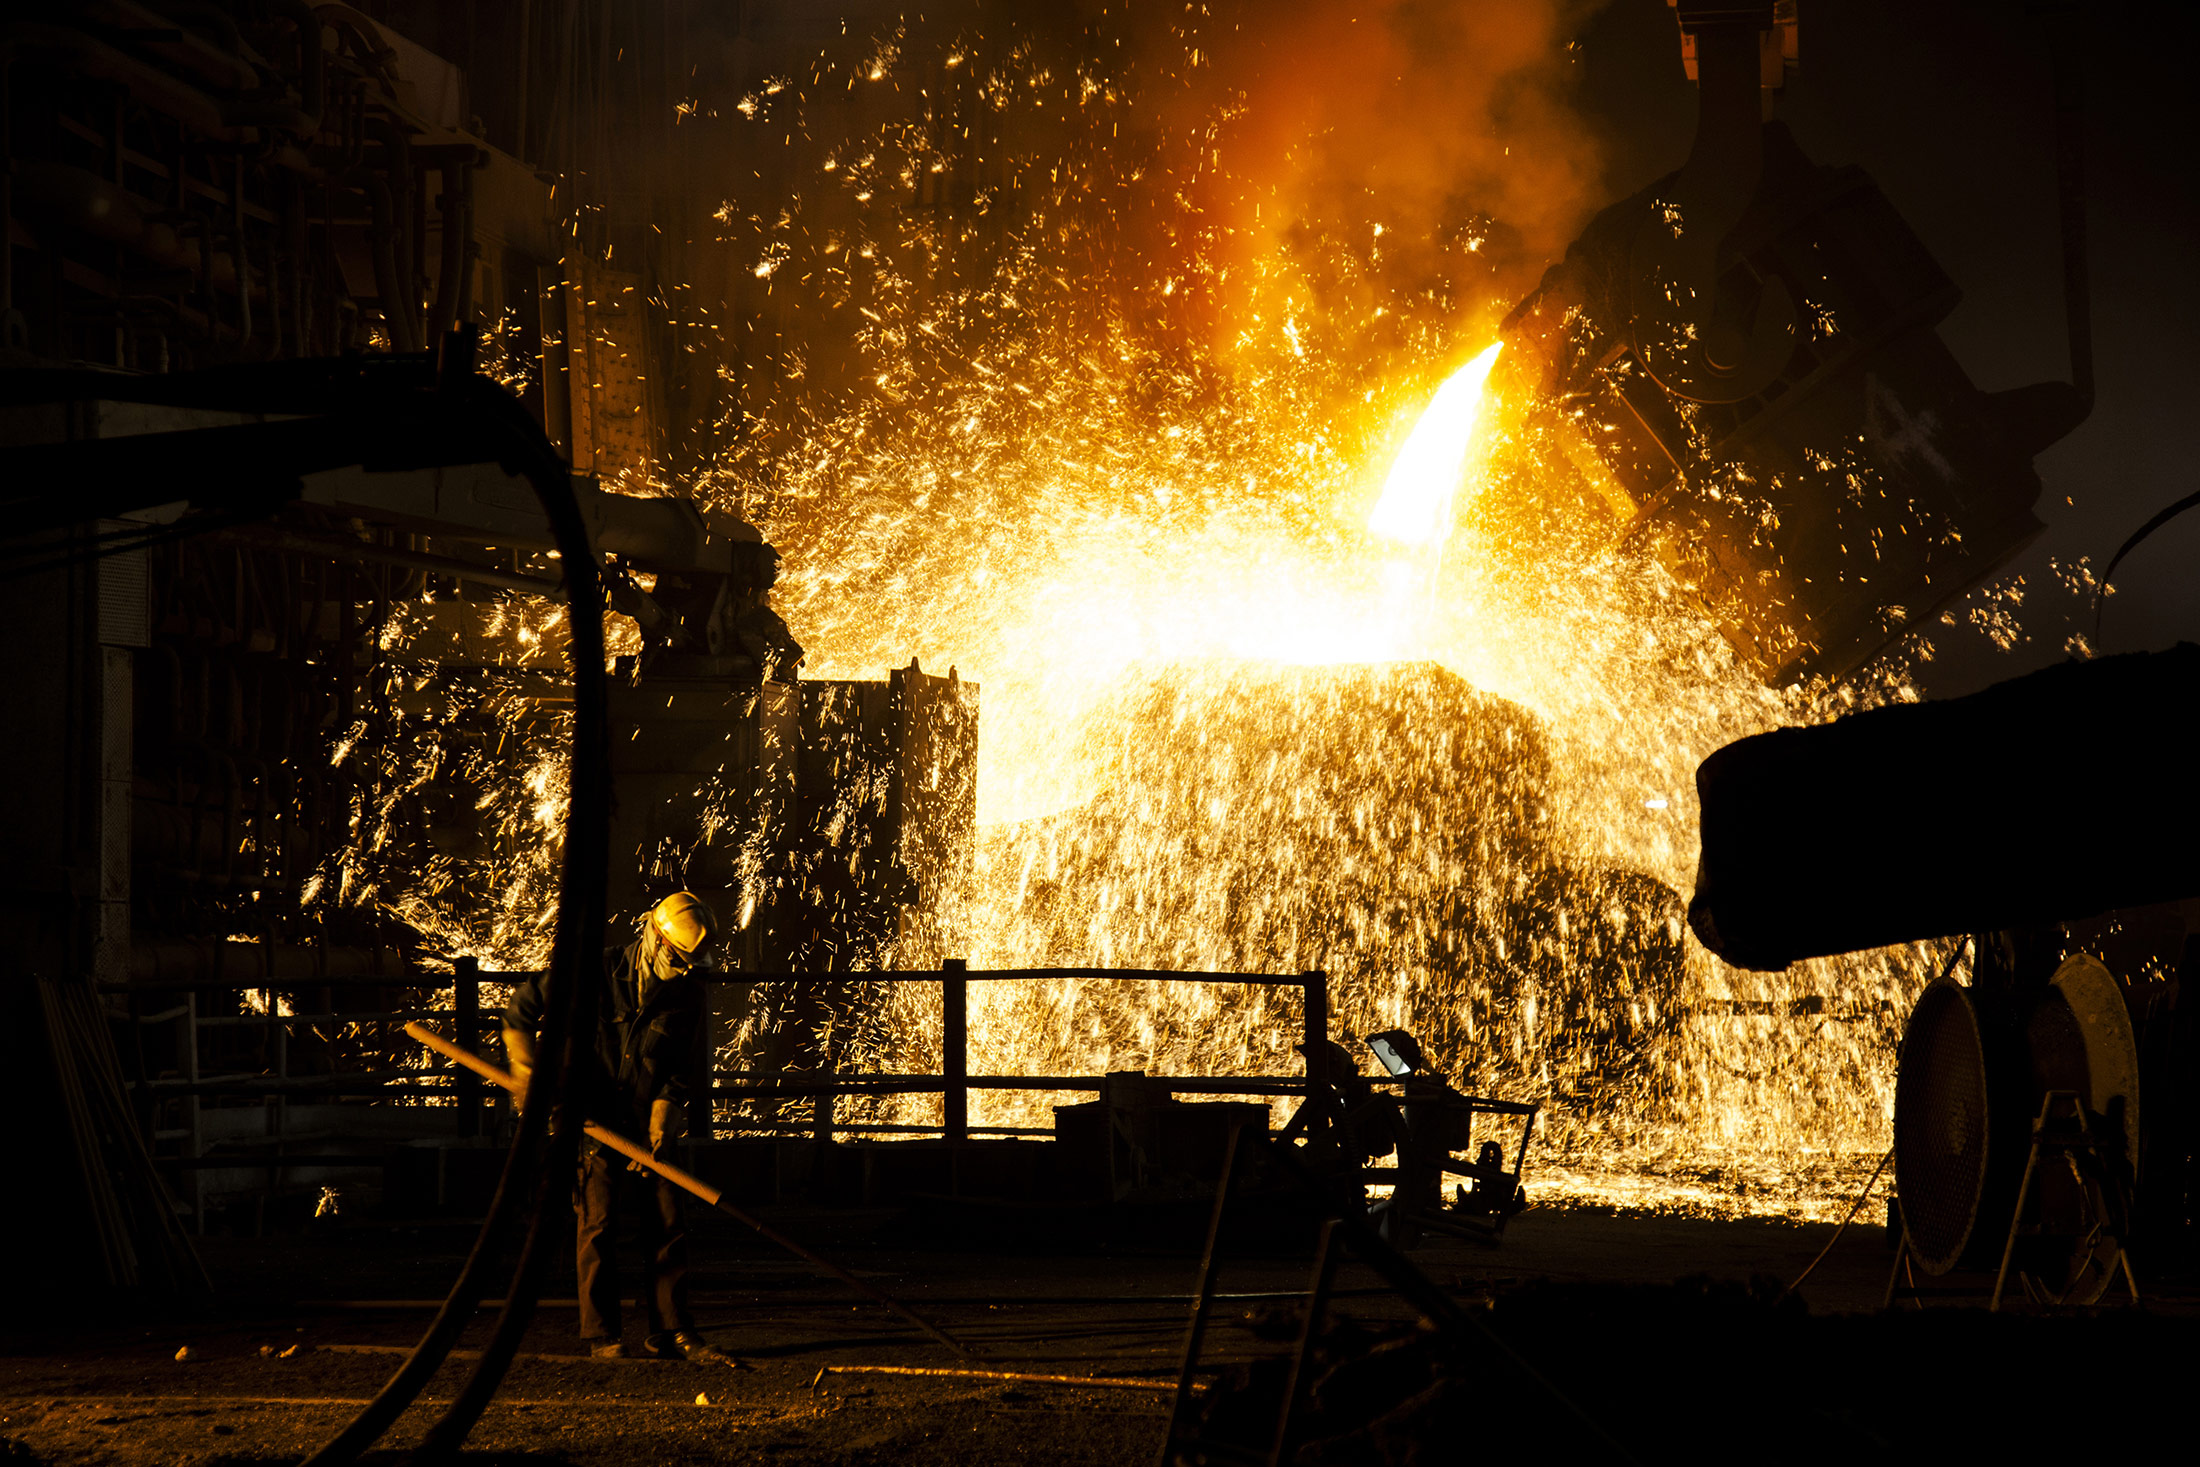 A worker works while sparks fly as molten steel is poured from a ladle at an arc furnace in a steel plant in Chhattisgargh.
